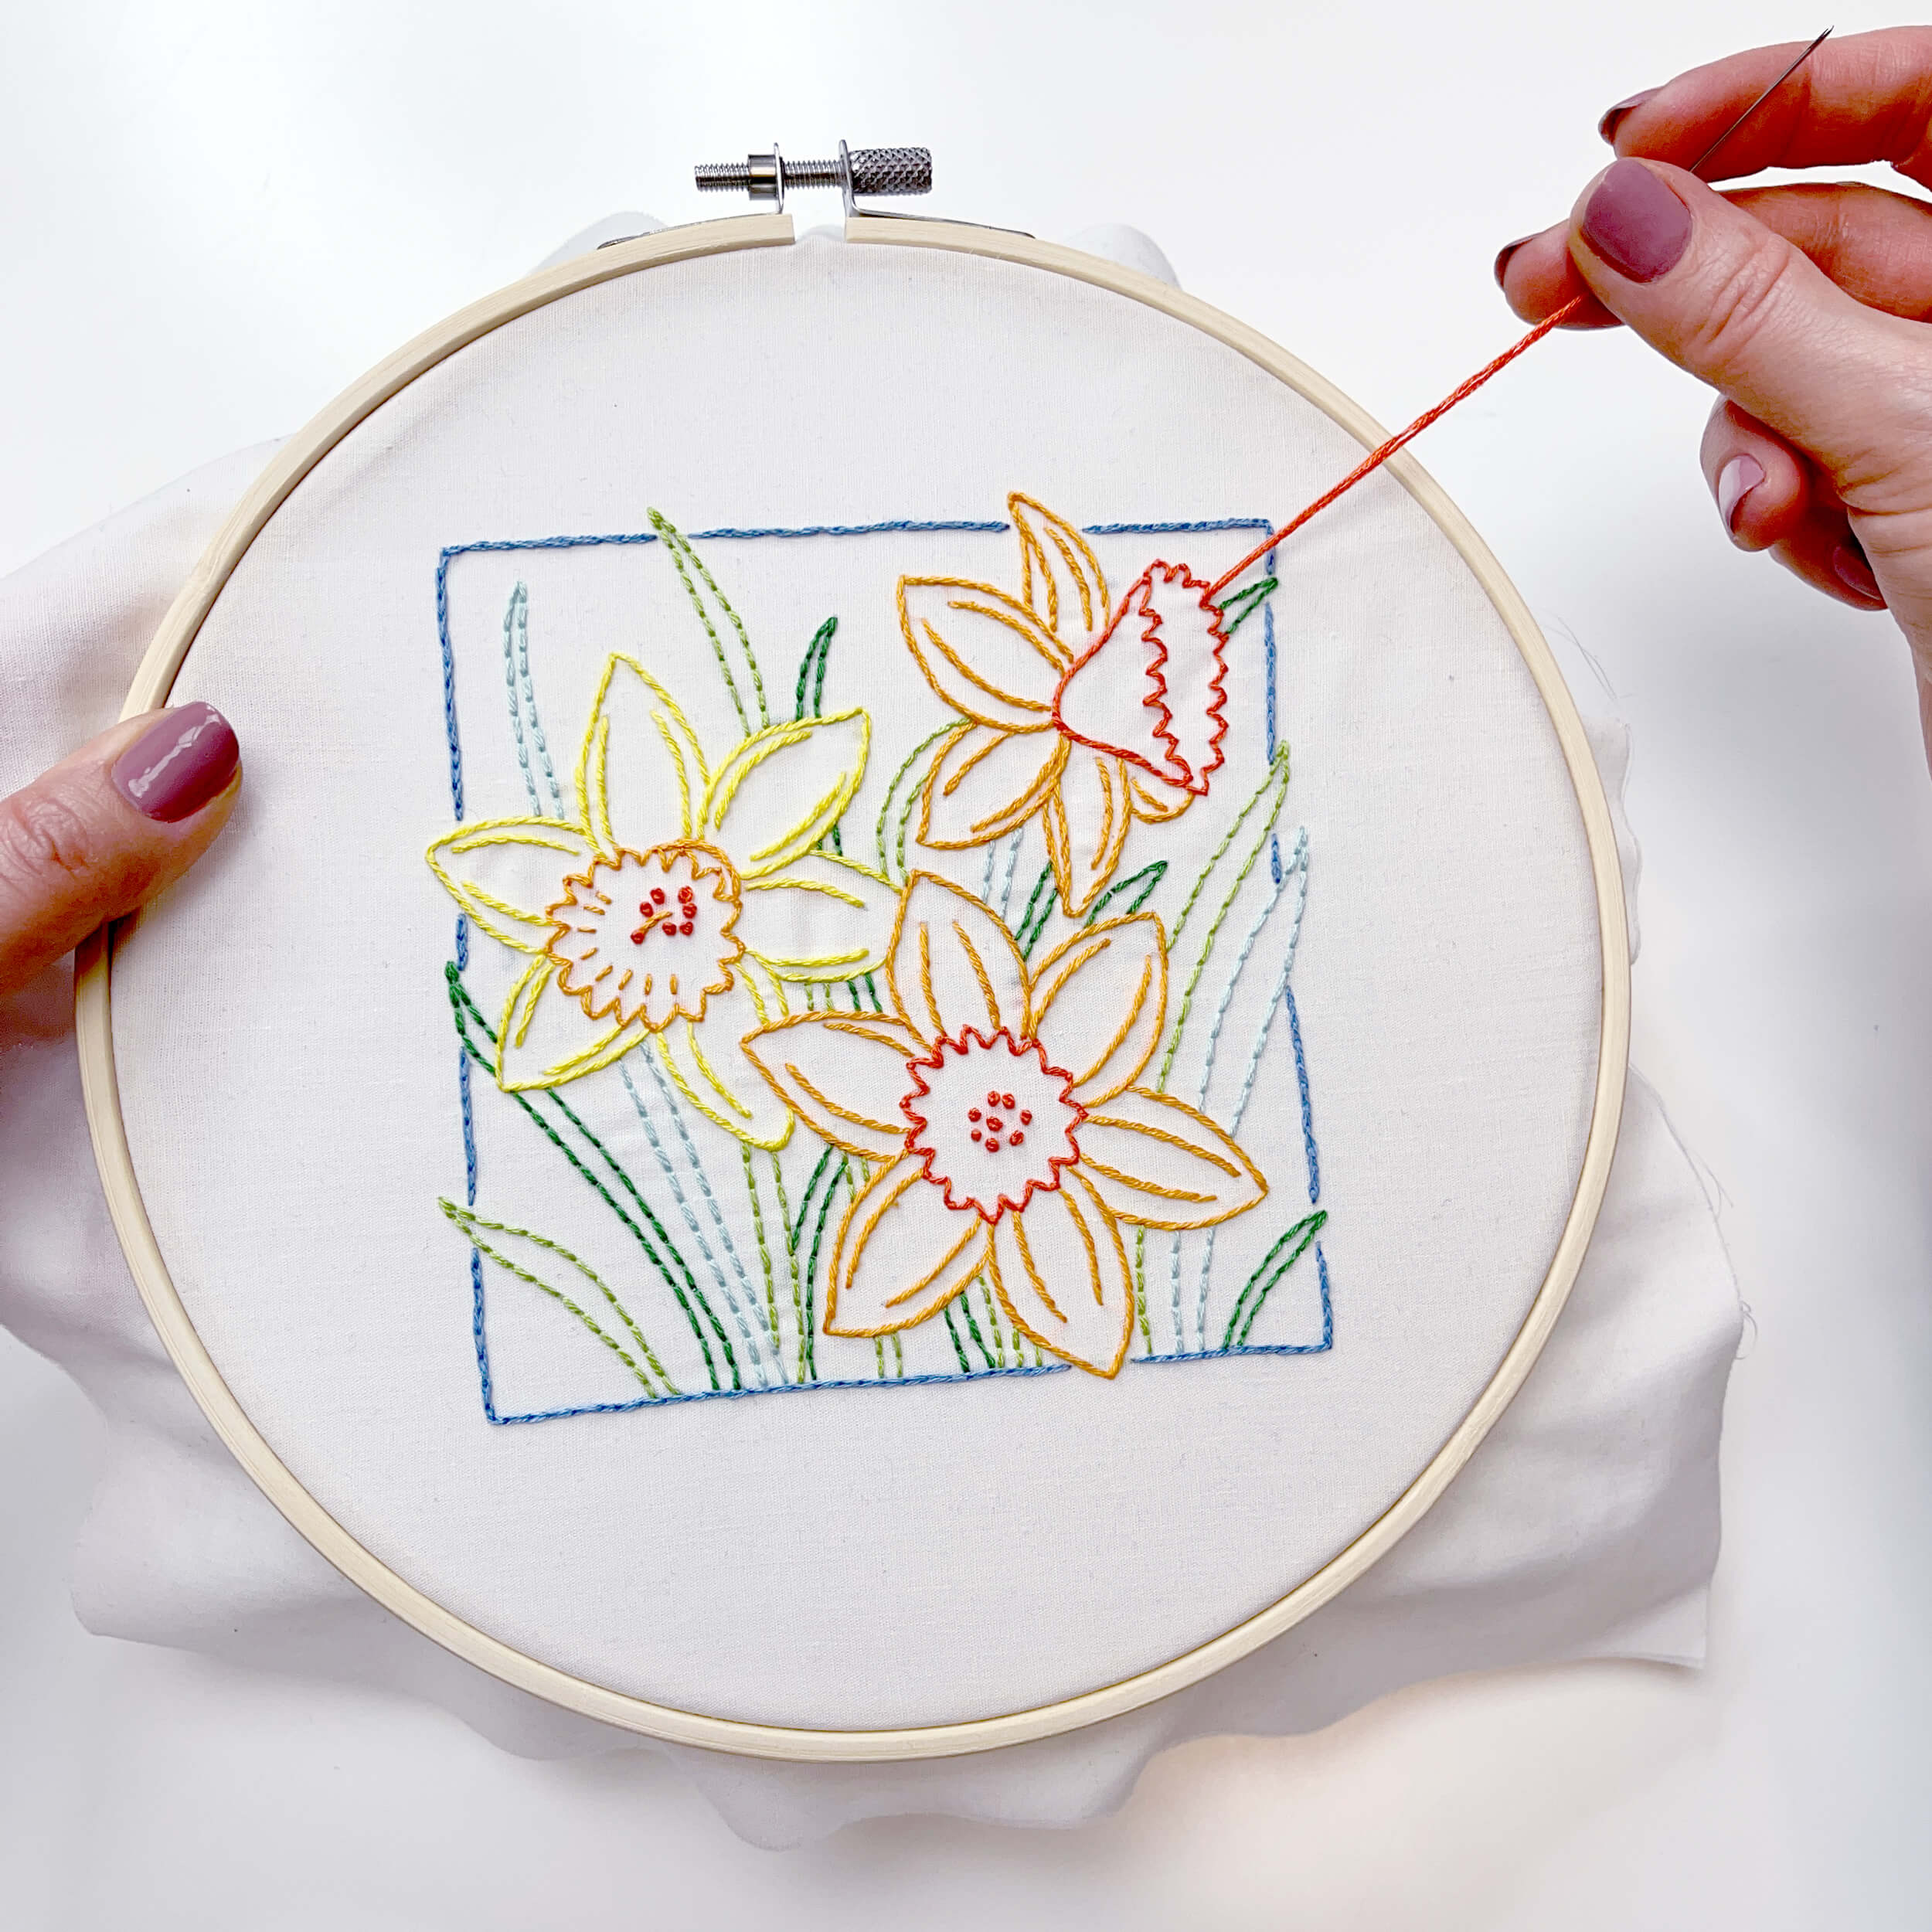 March Daffodil embroidery pattern